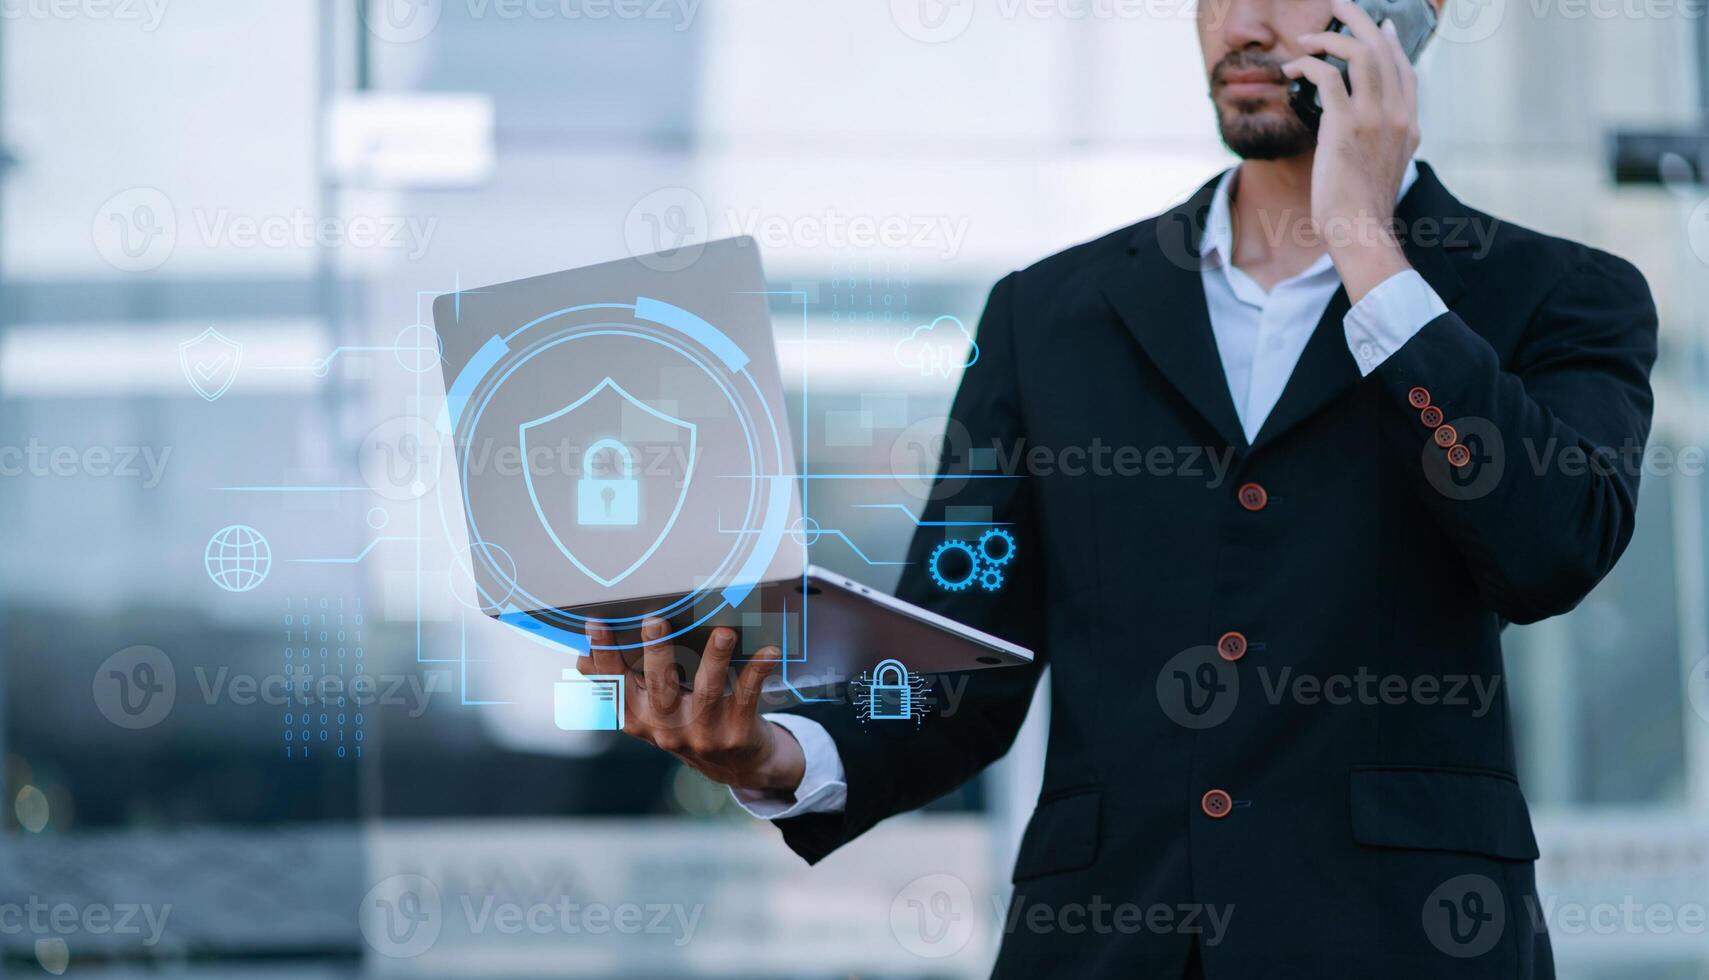 Cybersecurity and privacy concepts to protect data. Lock icon and network security technology. Man protecting personal data on smartphone tablet, virtual screen interfaces. photo